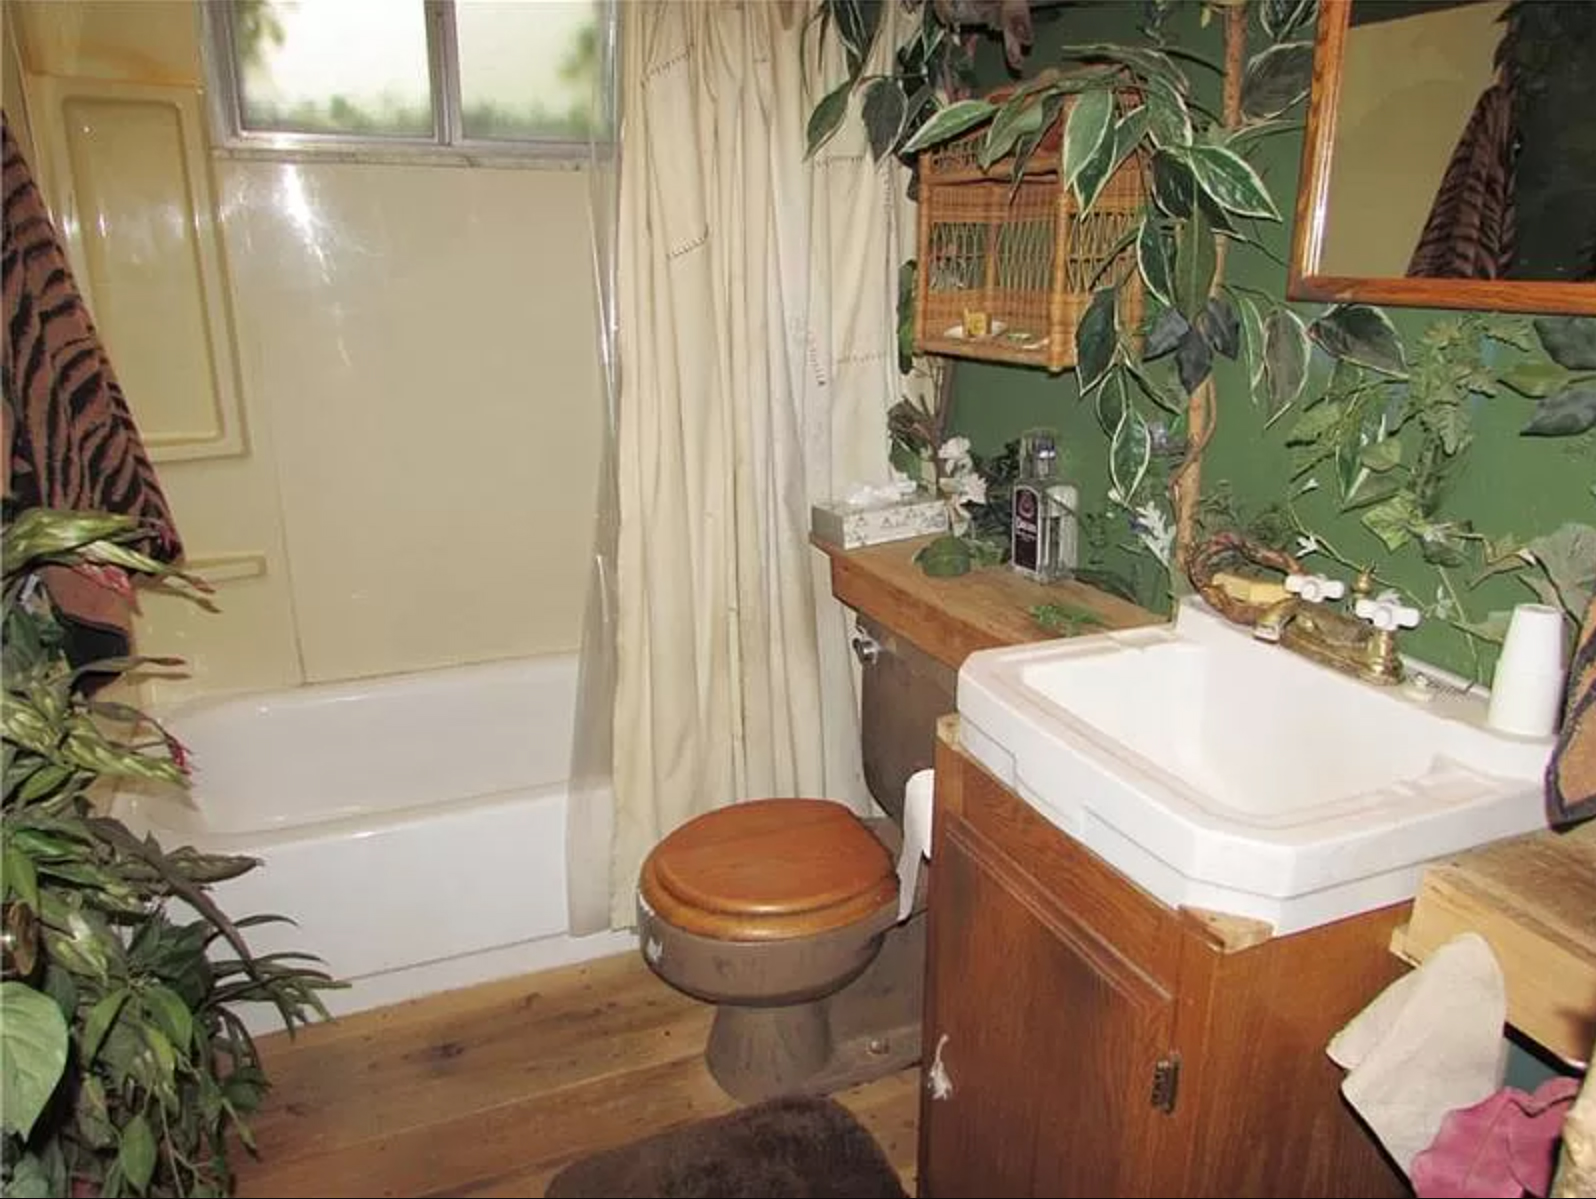 bathroom with vines and plants everywhere